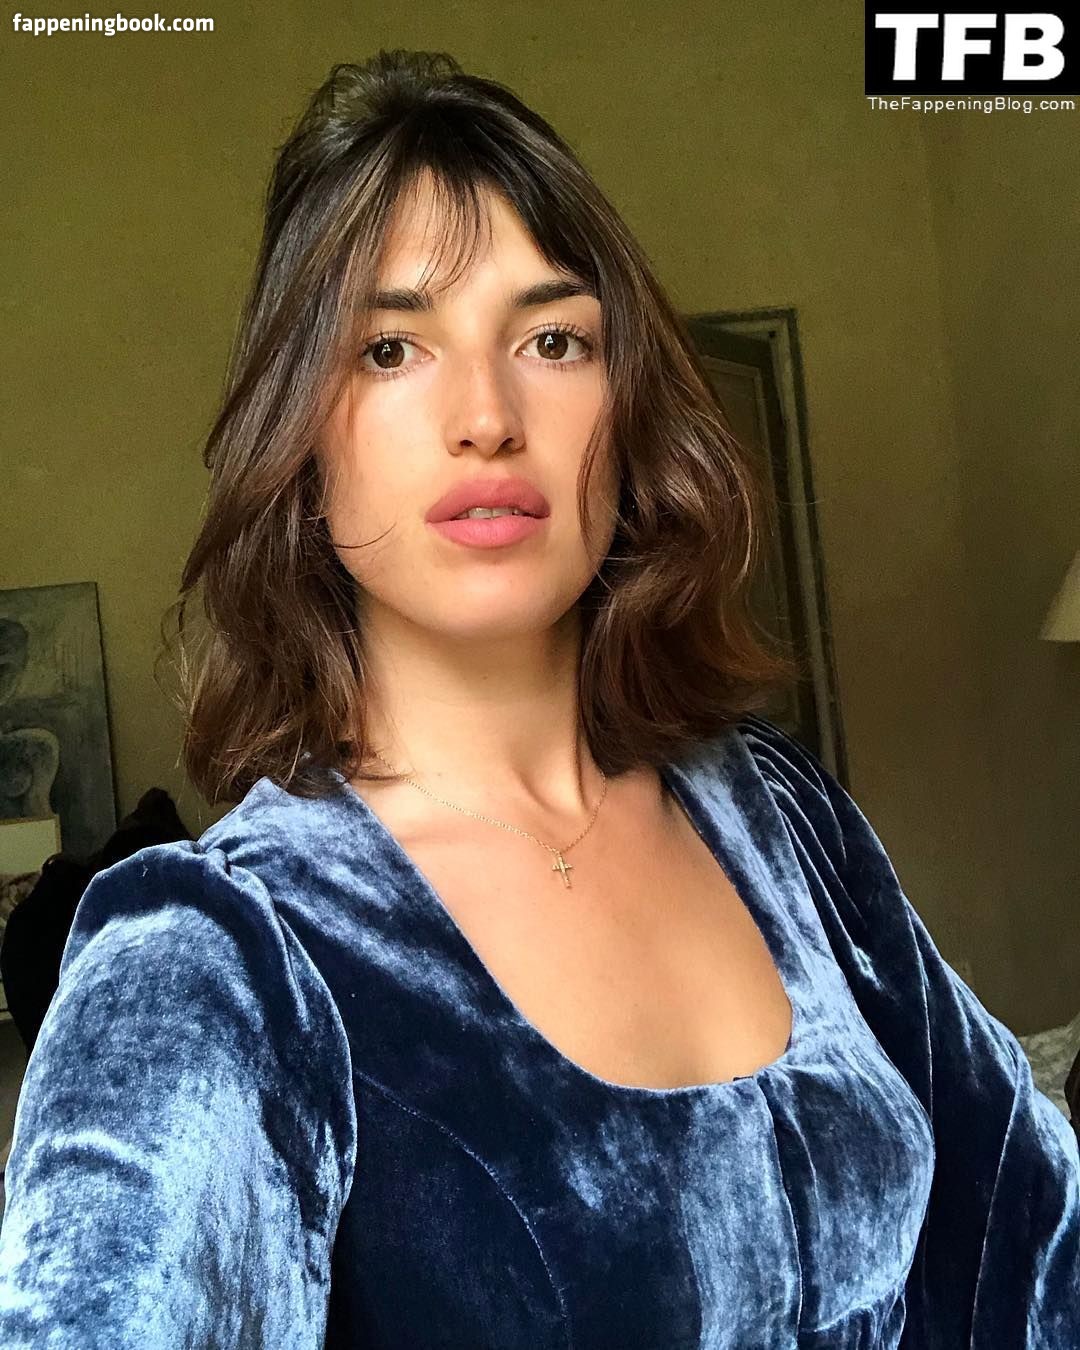 Jeanne Damas Nude The Fappening Photo Fappeningbook